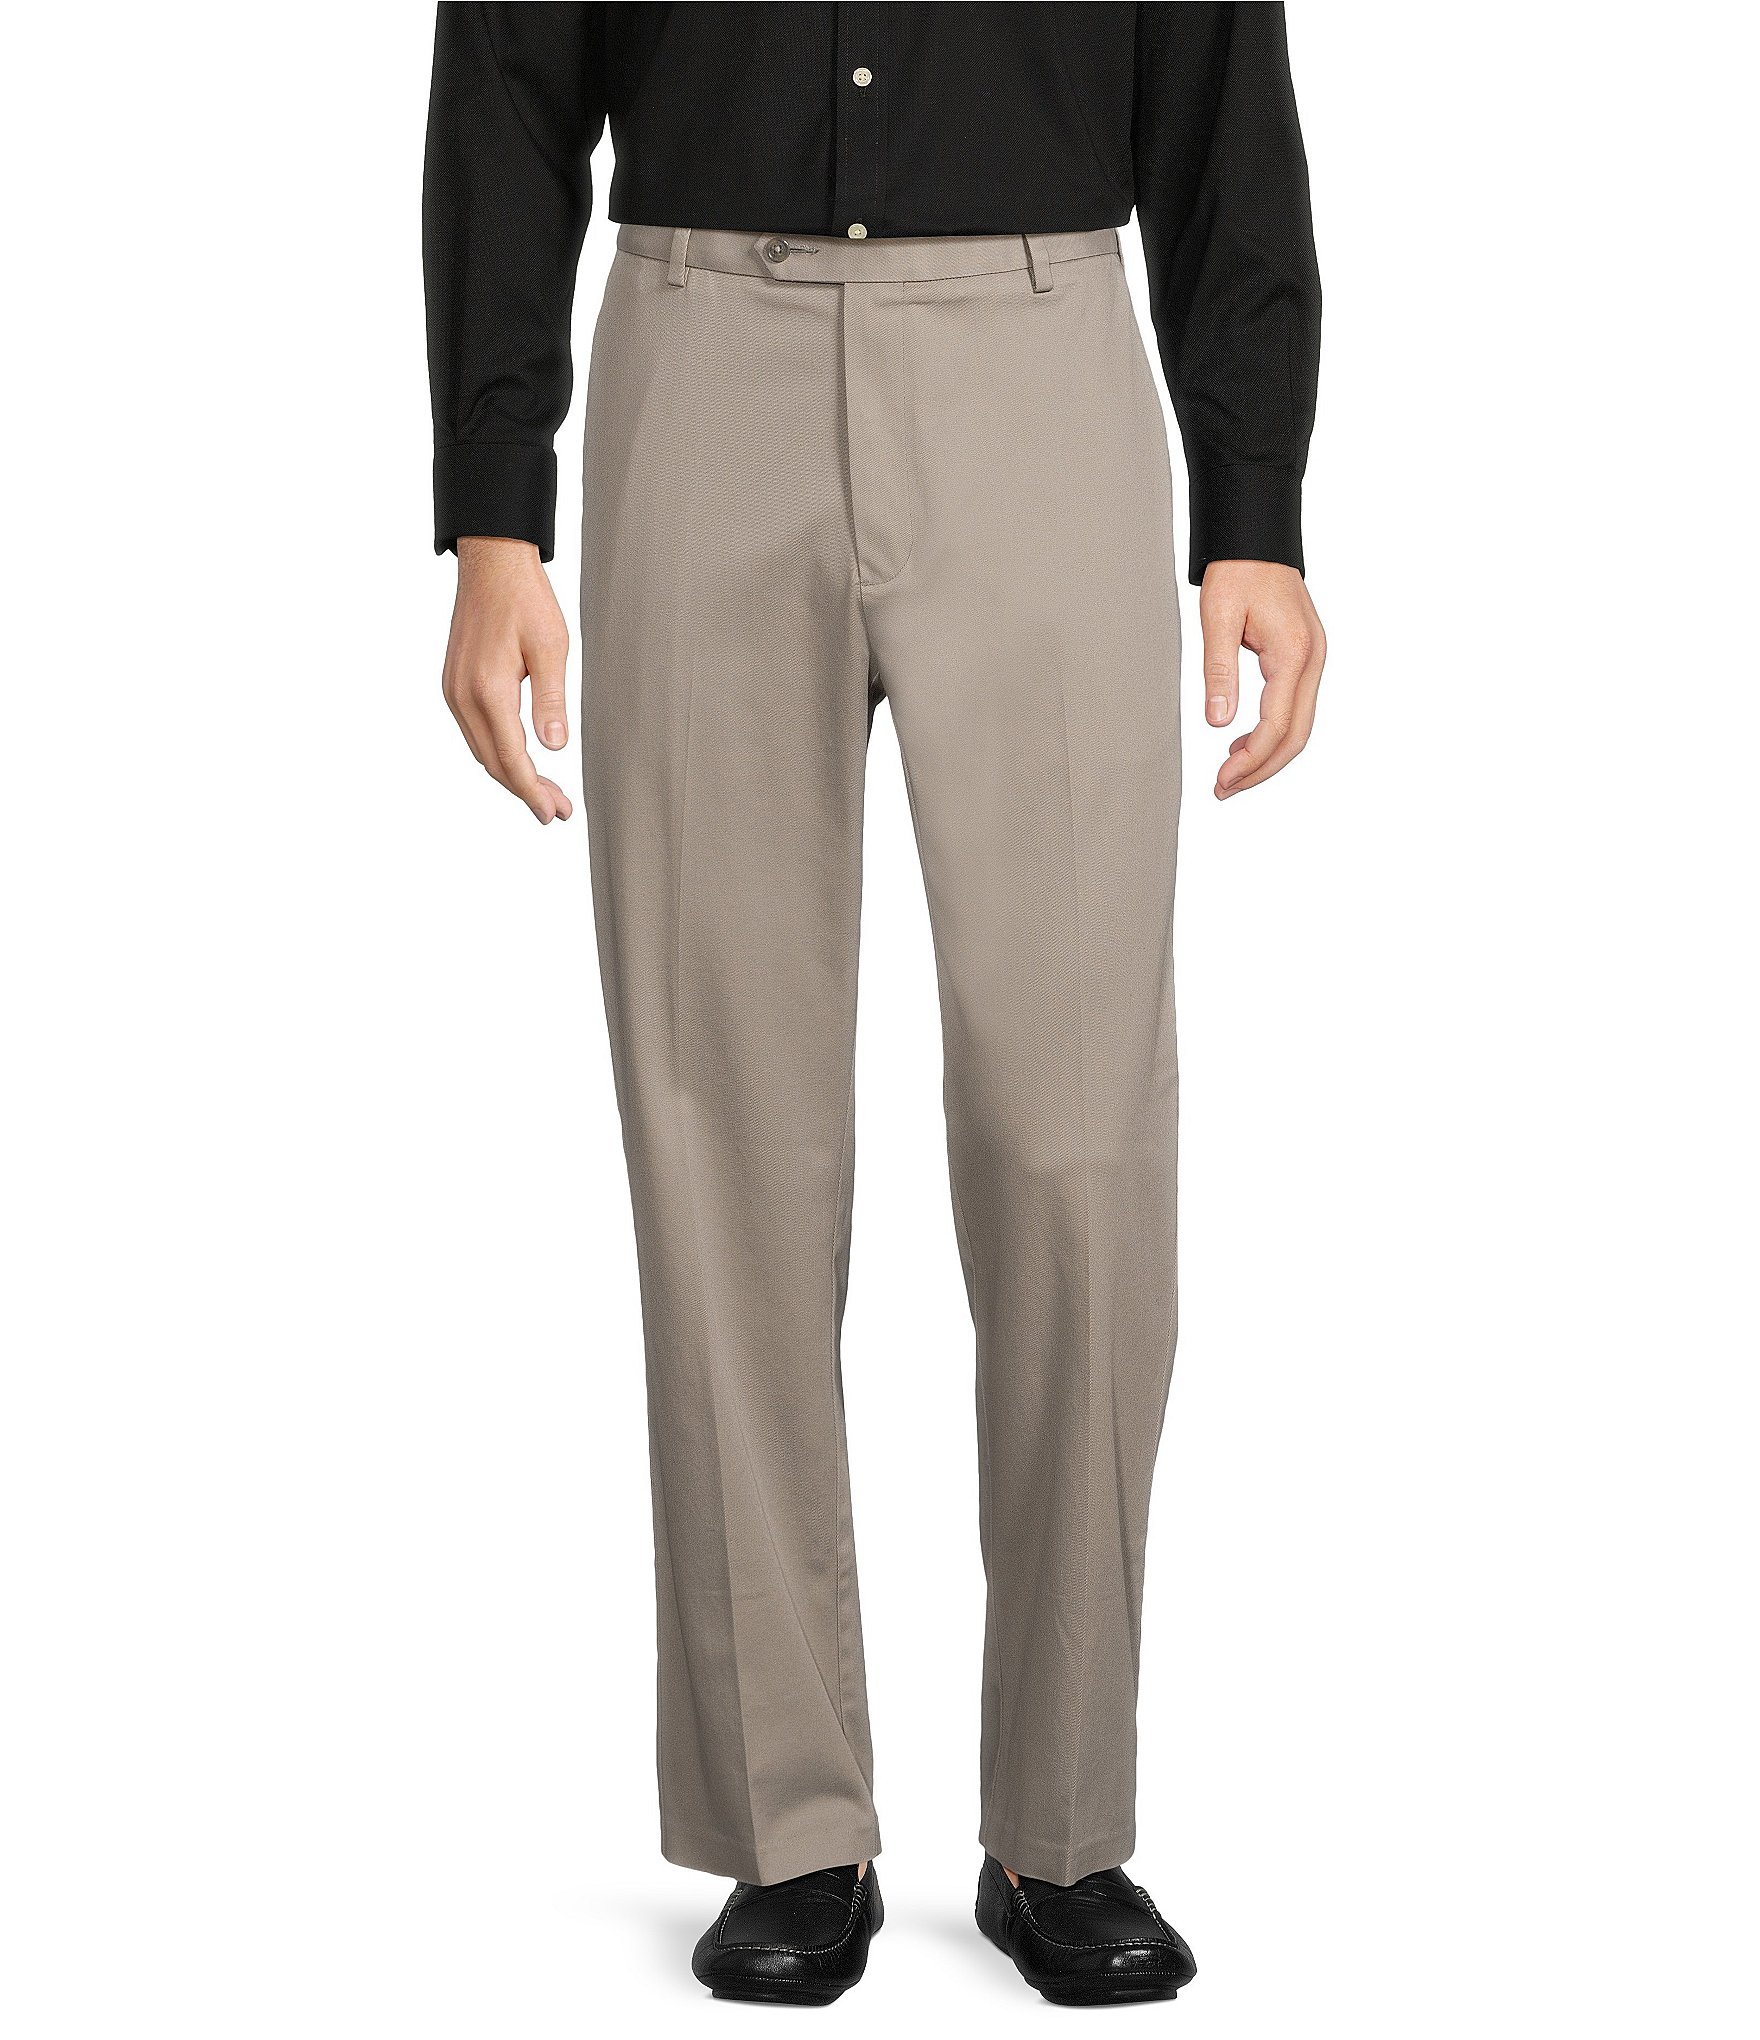 Buy Ribbed Flat-Front Trousers Online at Best Prices in India